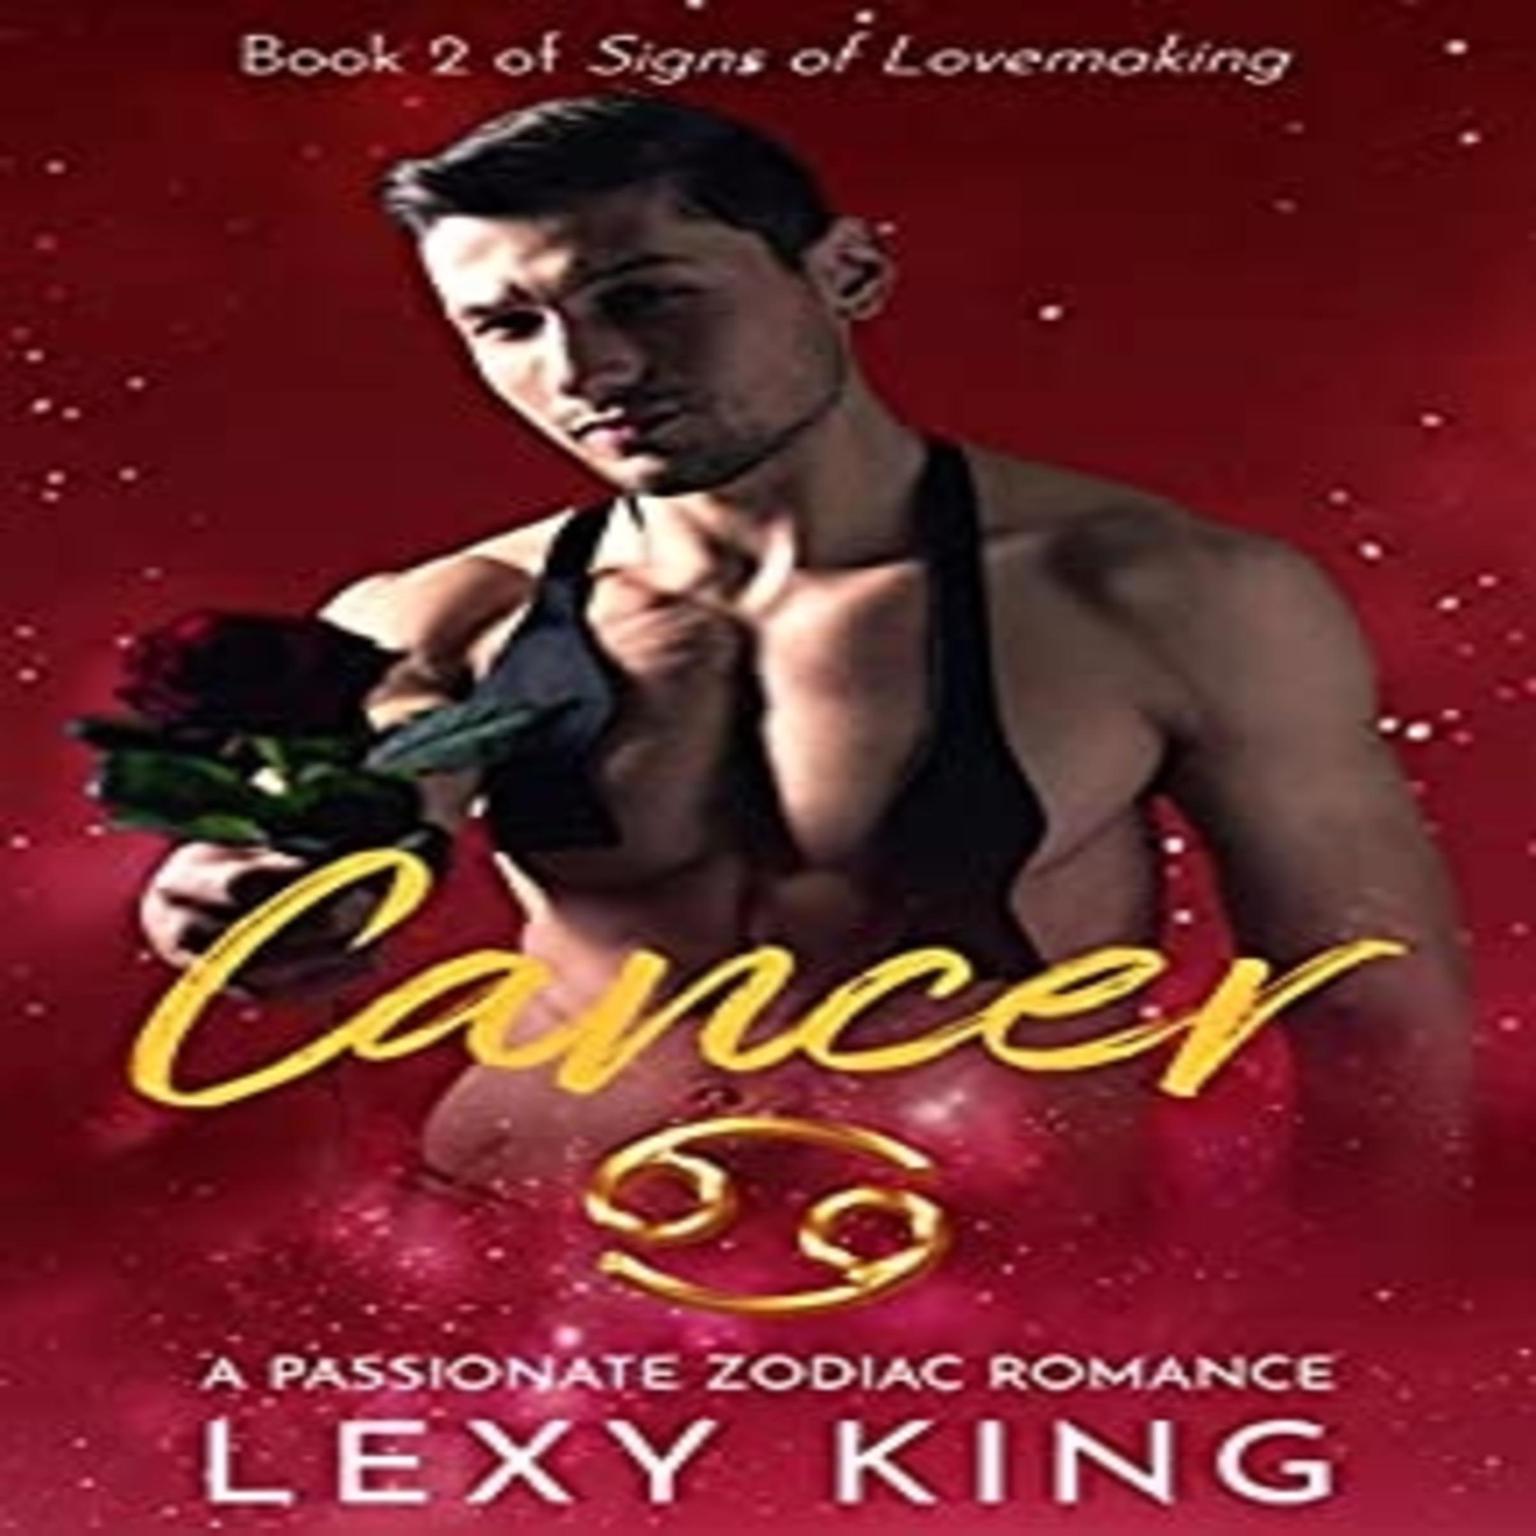 Cancer:  A Passionate Zodiac Romance (Book 2 in Signs of Lovemaking) Audiobook, by Lexy King